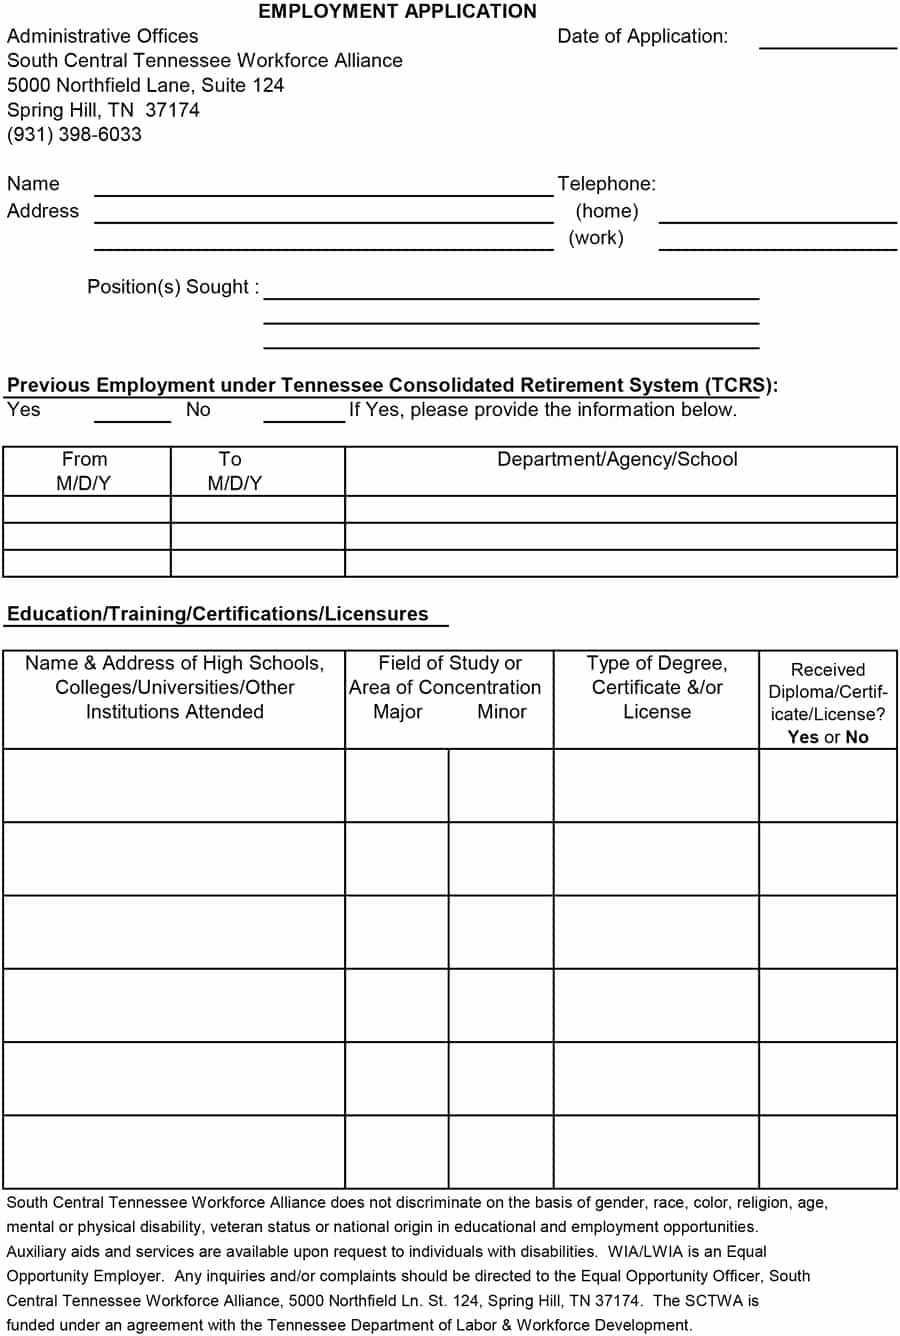 Free Employment Application form Download Best Of 50 Free Employment Job Application form Templates